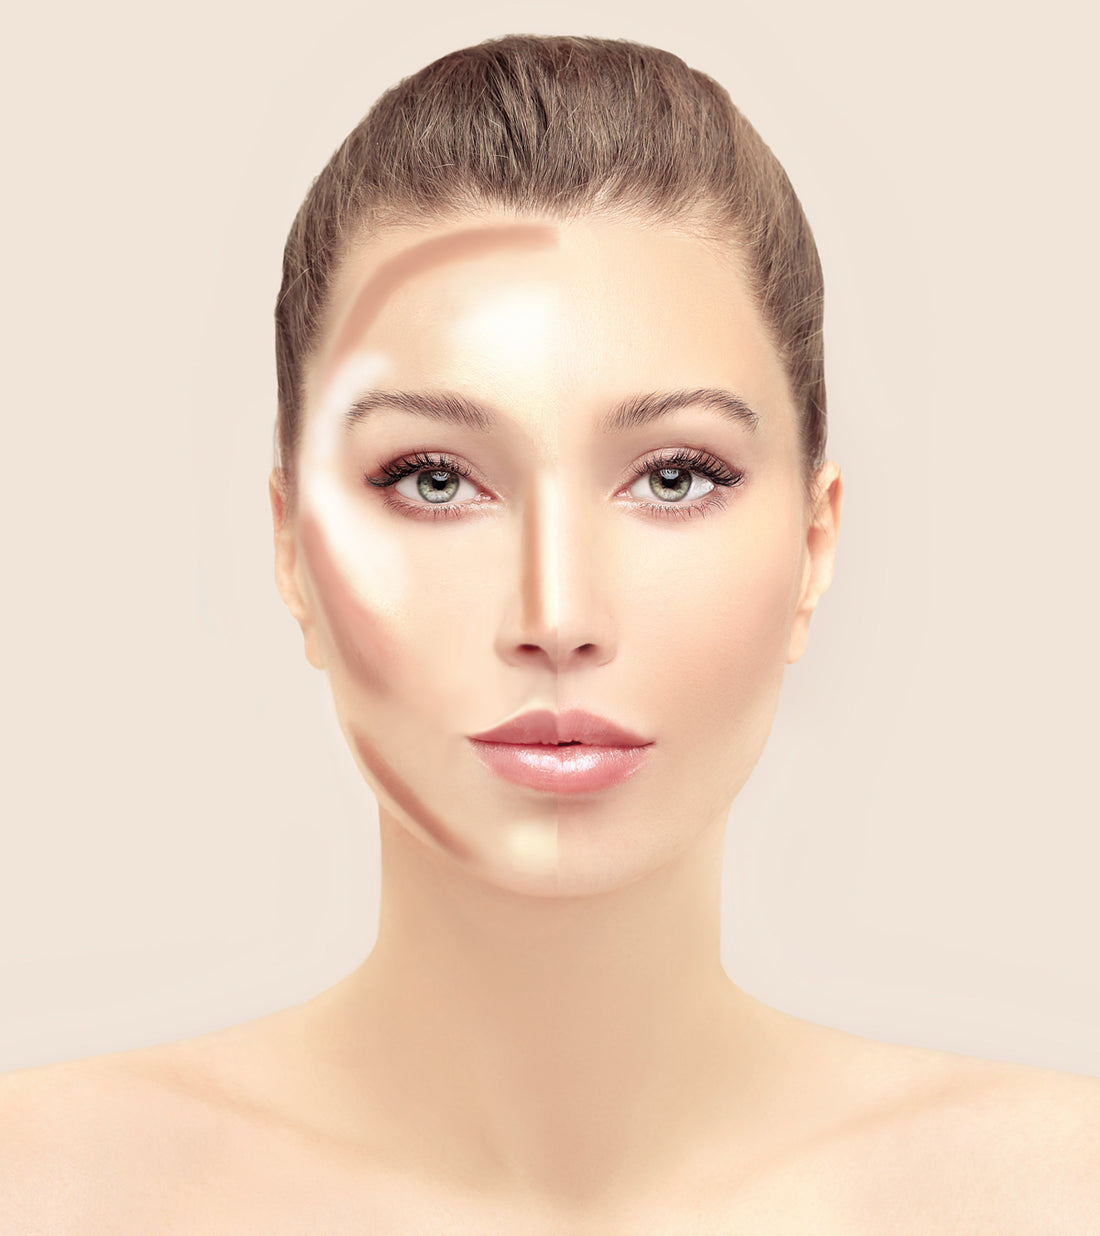 Learn how to make the right contour for each face shape (With Images)